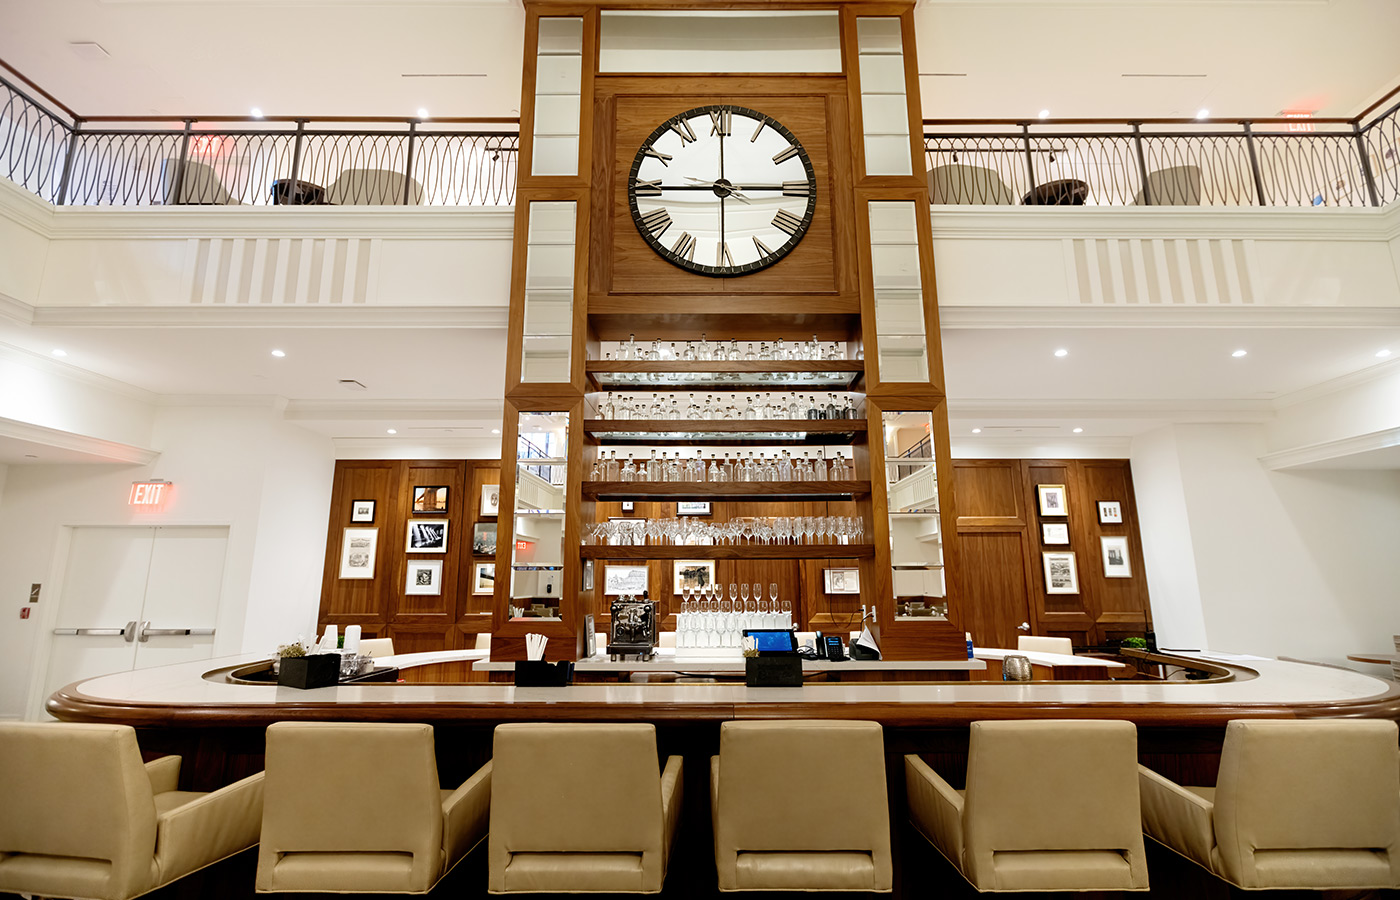 The bar of the main dining room with a giant clock above.